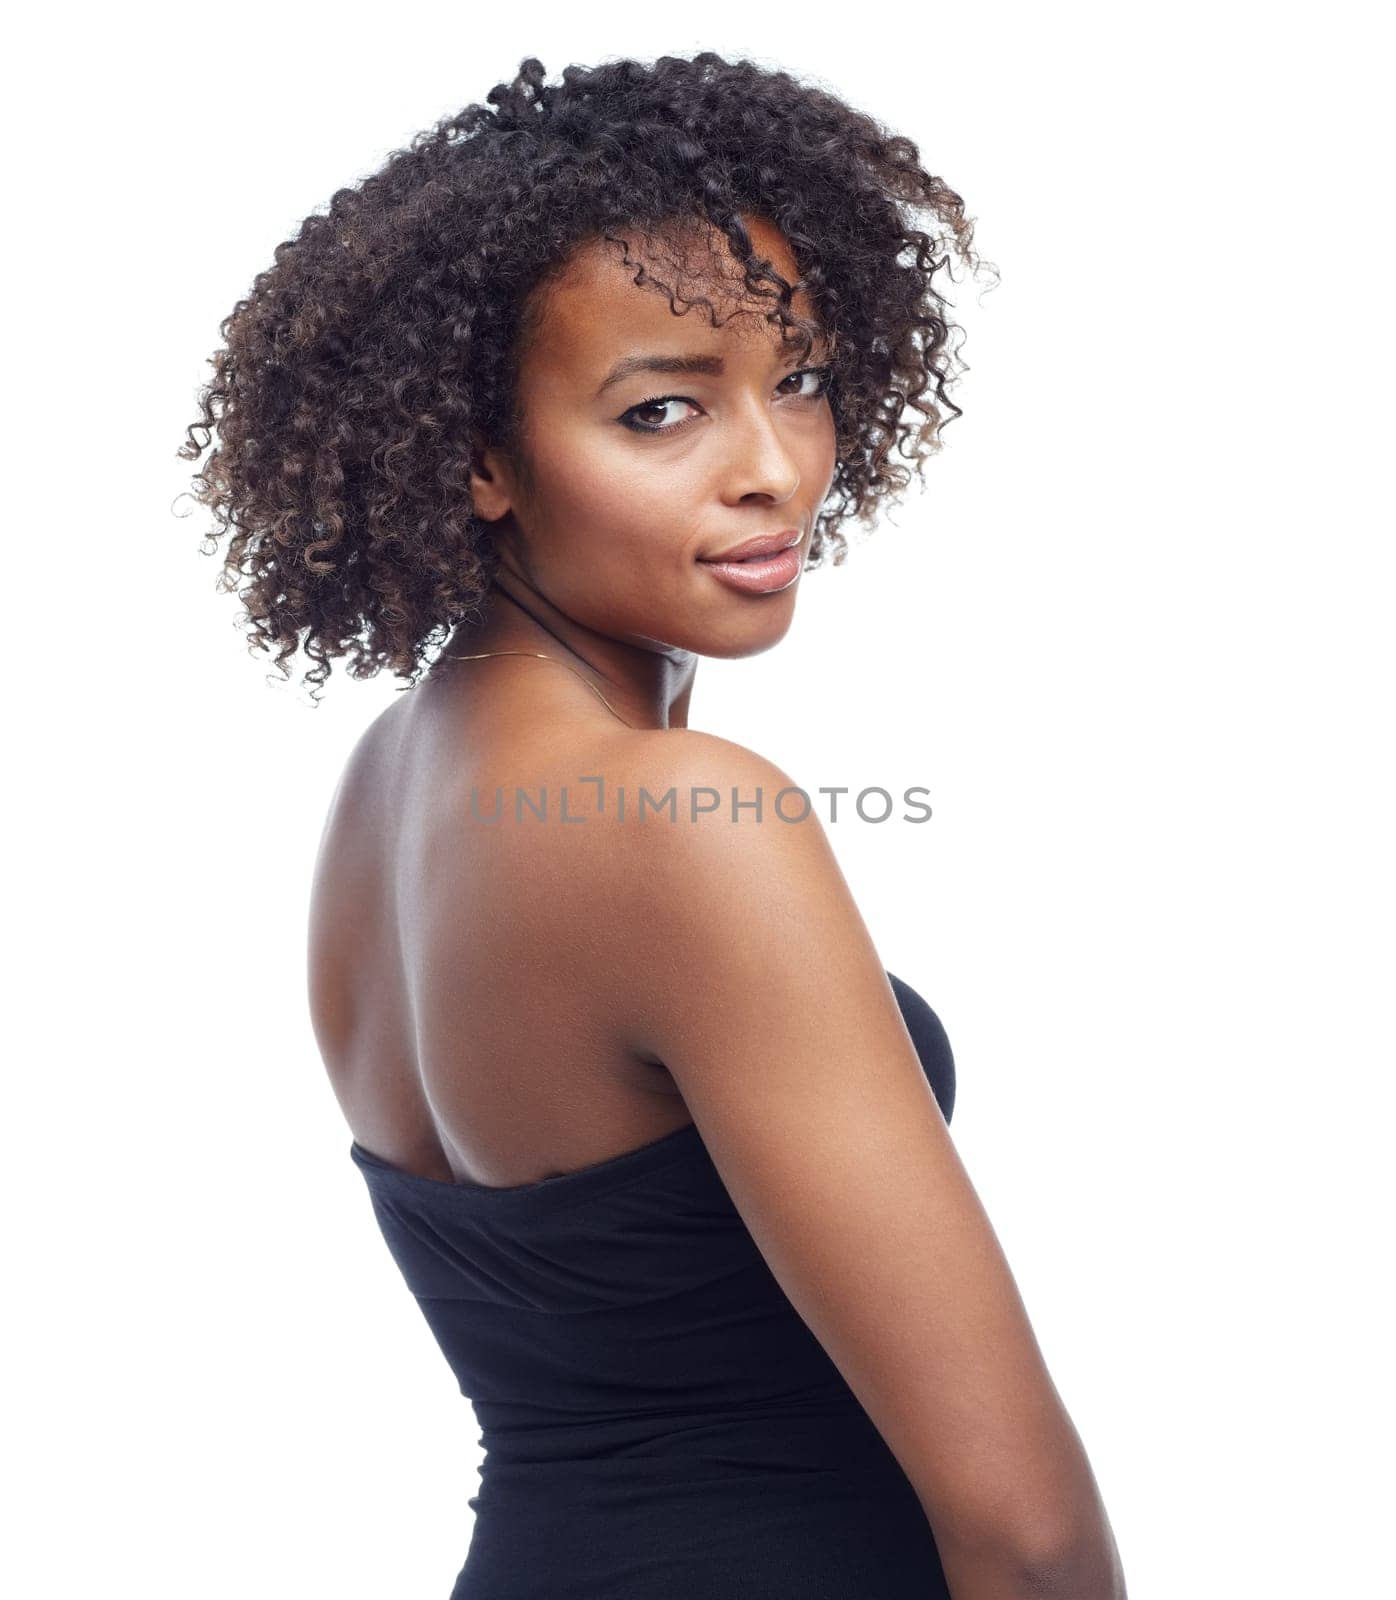 Portrait, black woman with skin and beauty for hair, texture and natural curls with cosmetics on white background. Cosmetology, makeup and haircare for growth, relax with confidence and smile.